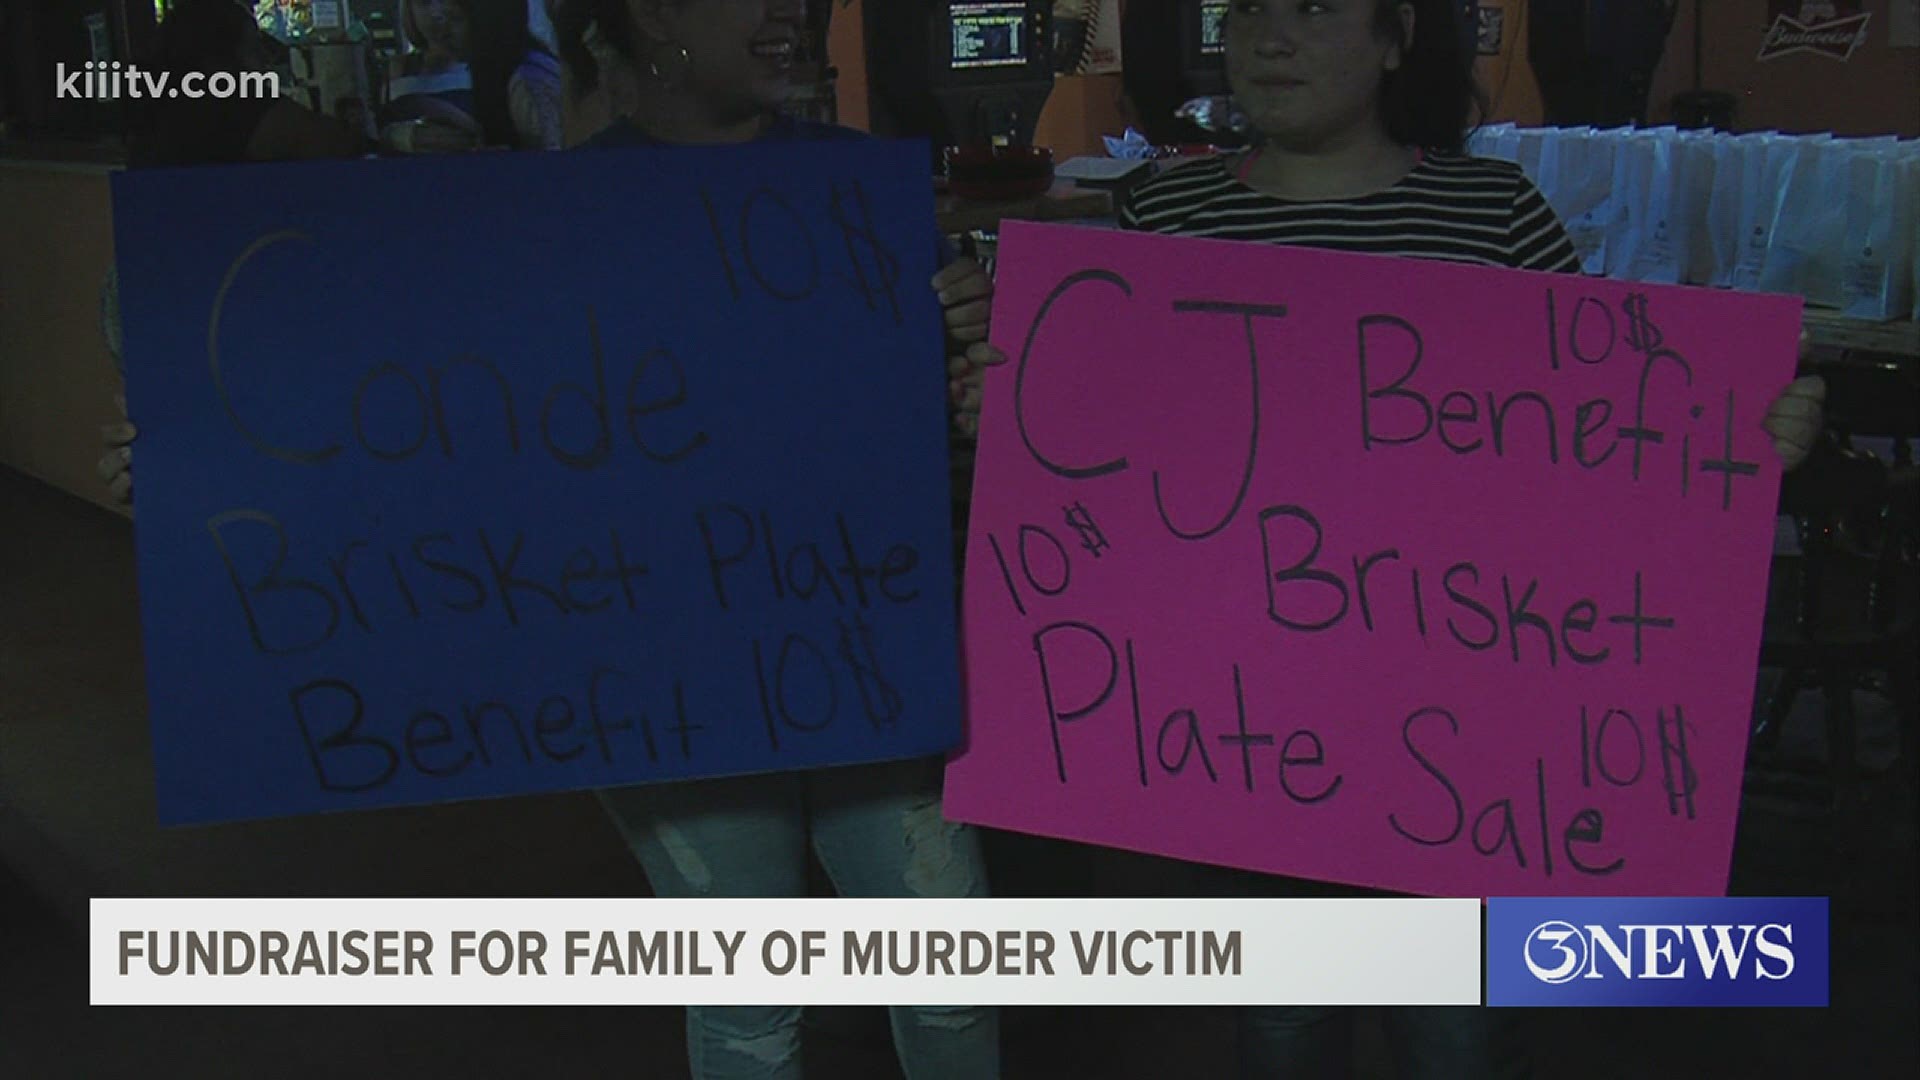 Family, friends and members of the community rallied together at 'The Office' in Kingsville to raise money for funeral expenses.